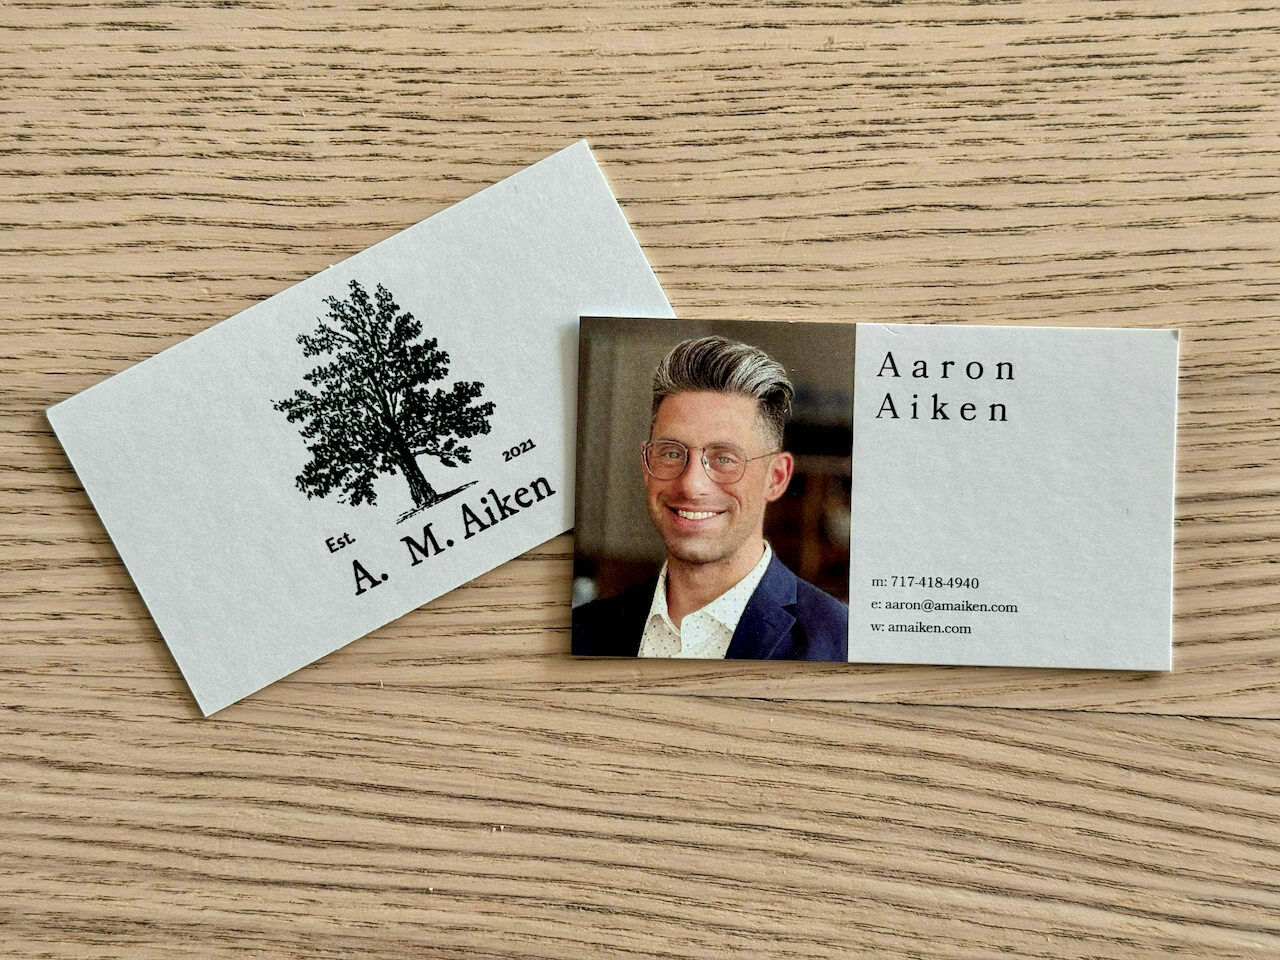 new business cards for A. M. Aiken - shown on a woodgrain table, one card showing the front of the card which has a nice whimsical tree on it, the other card showing the back which has a nice photo of Aaron and his contact details.